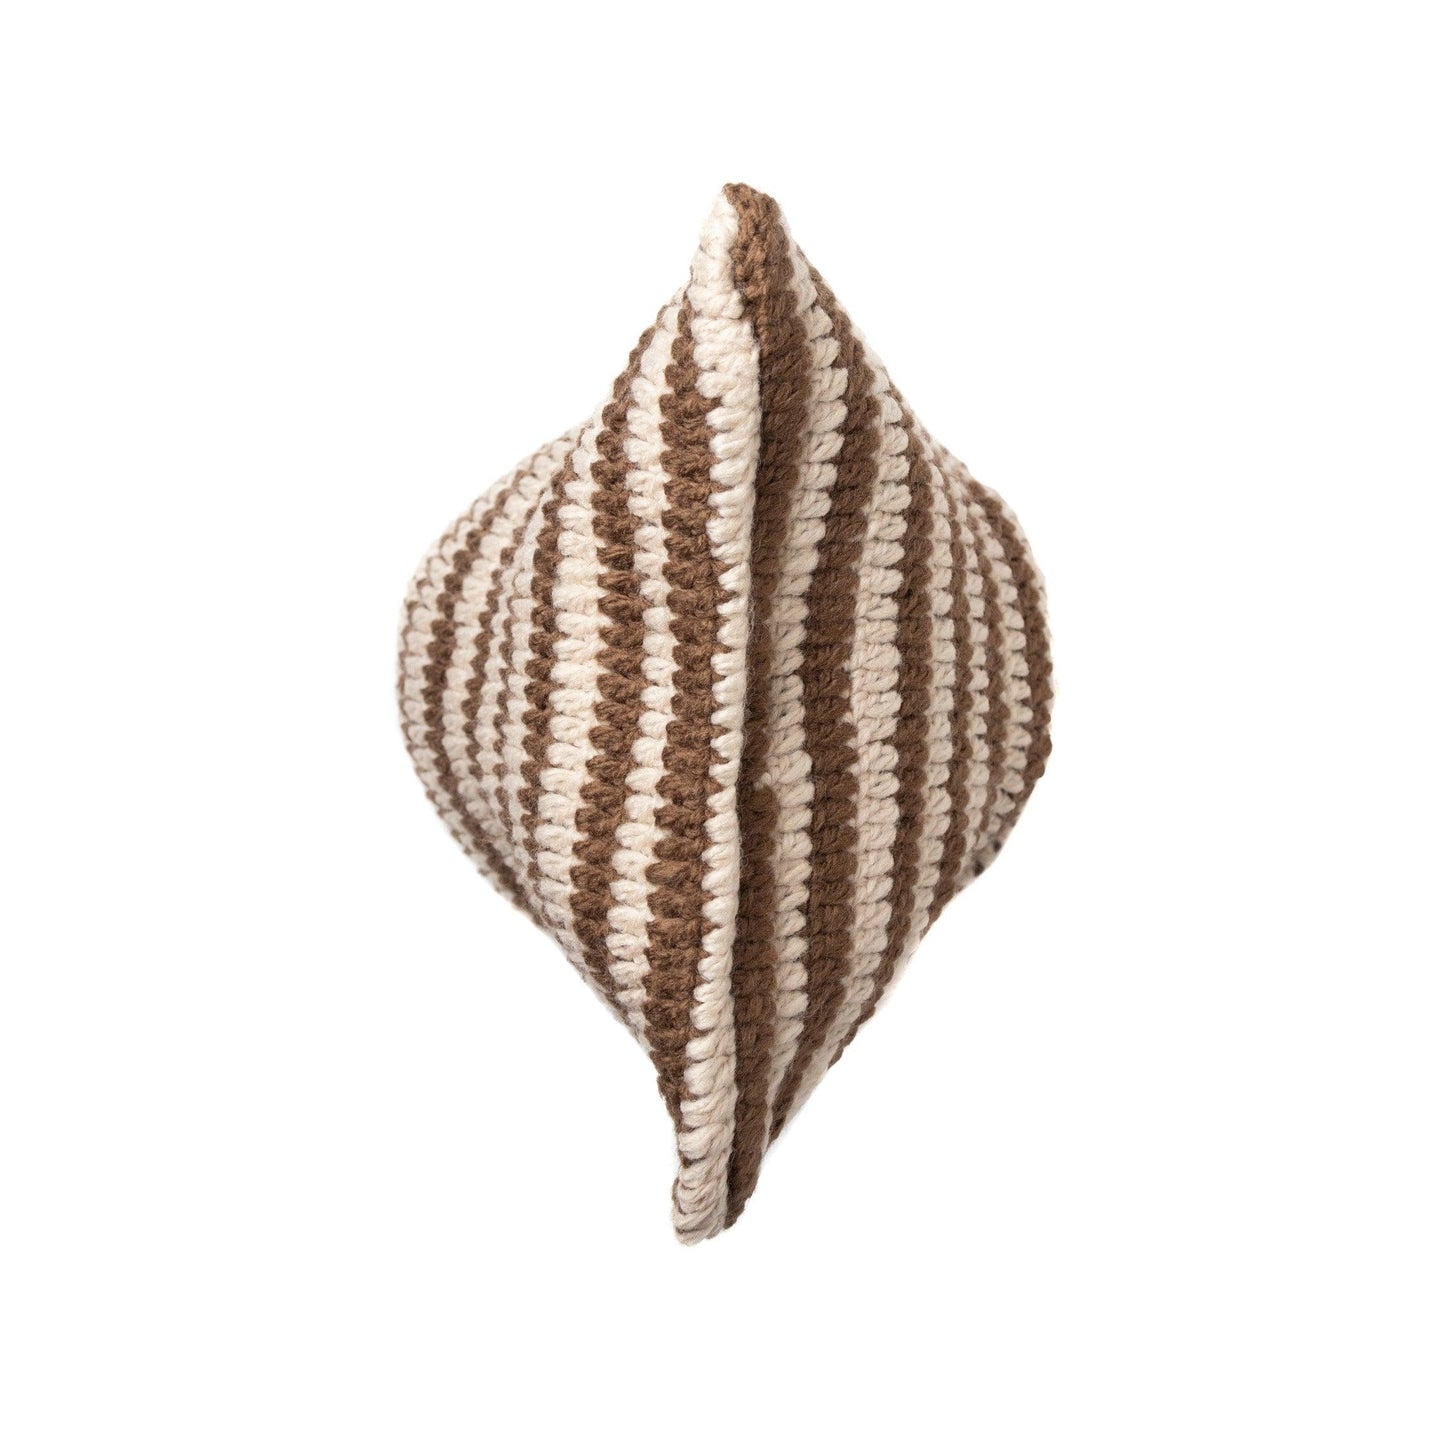 Striped Crochet Brown Beanies - Known Source